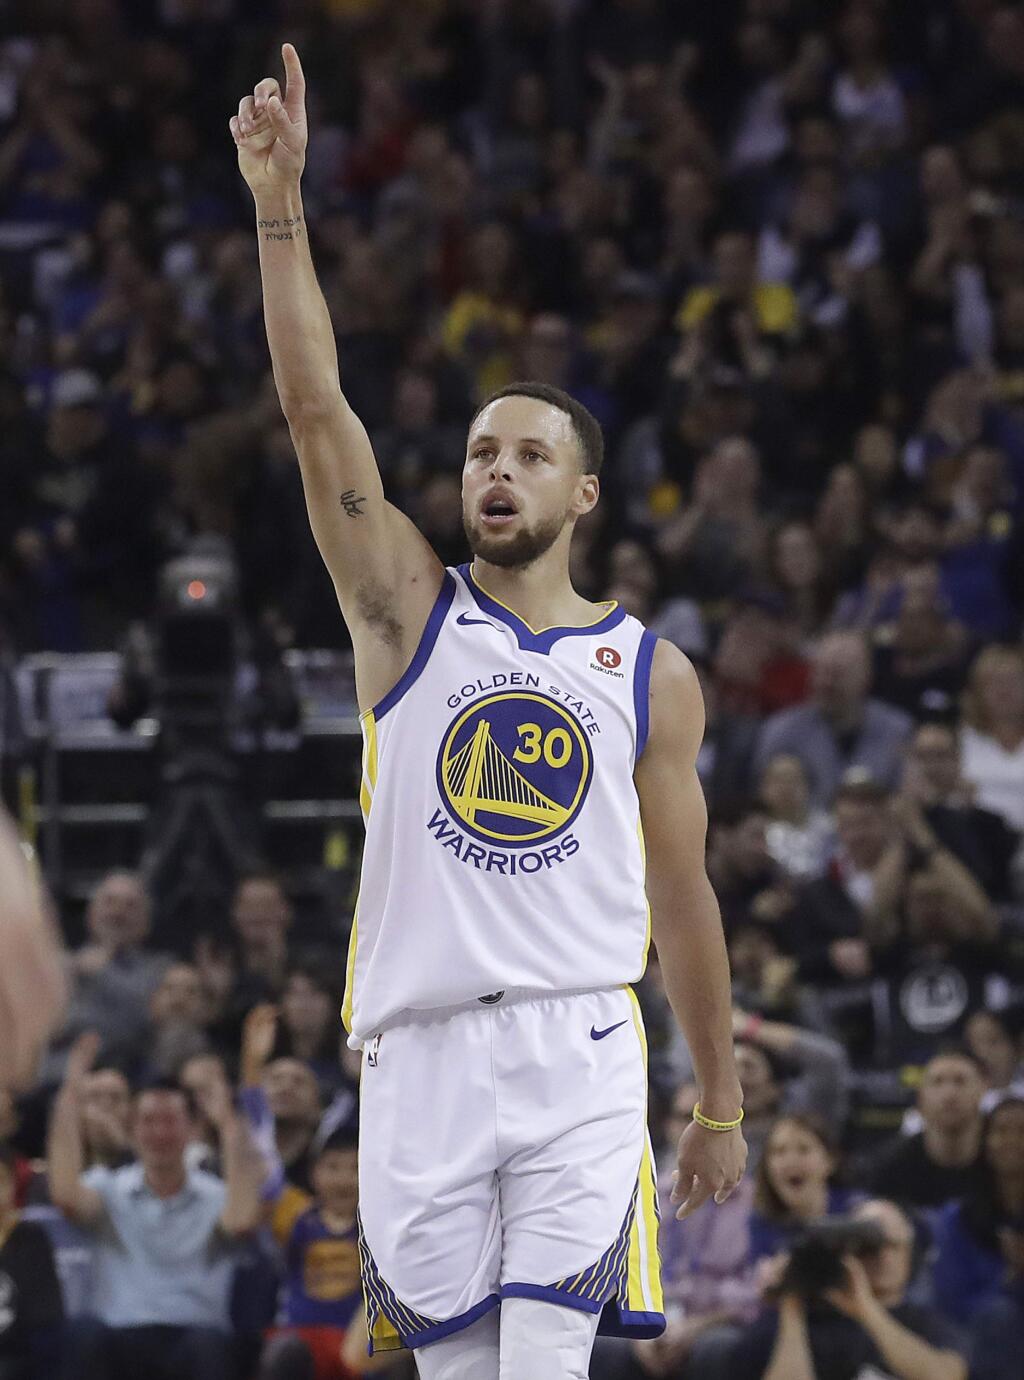 Golden State Warriors guard Stephen Curry (30) reacts after scoring against the Brooklyn Nets during the first half in Oakland, Tuesday, March 6, 2018. (AP Photo/Jeff Chiu)